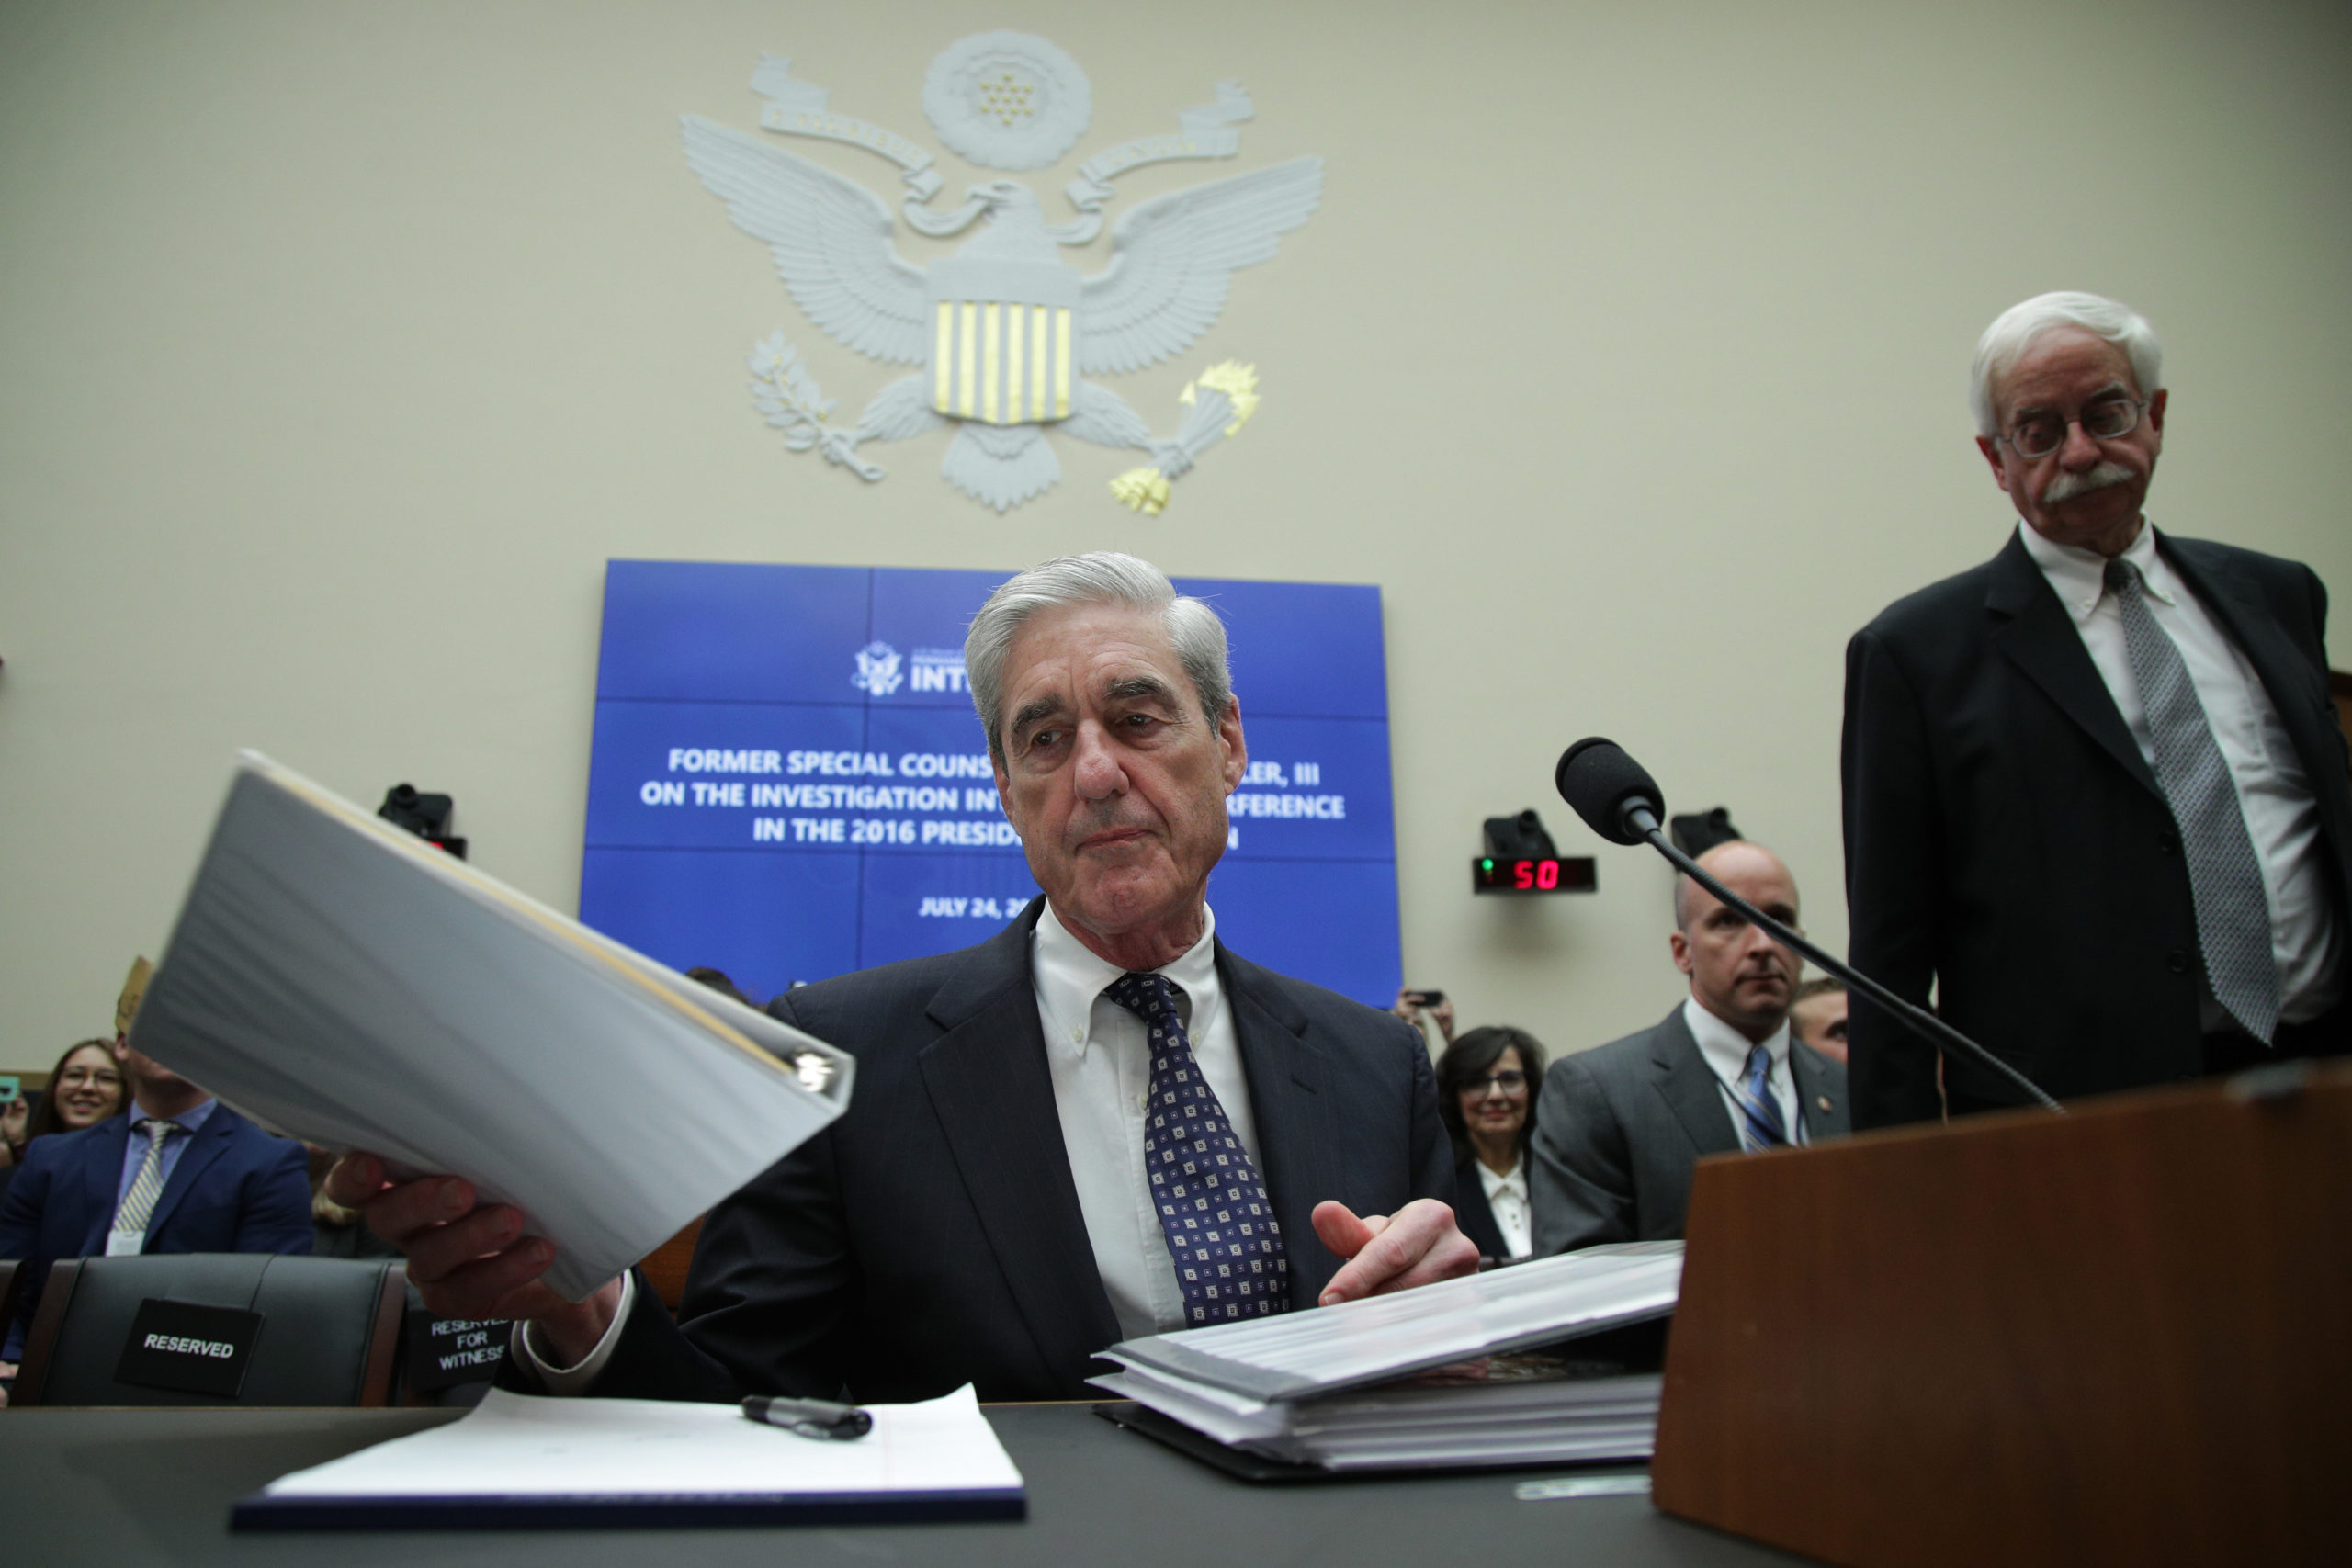 WASHINGTON, DC - JULY 24: Former Special Counsel Robert Mueller waits to testify before the House Intelligence Committee about his report on Russian interference in the 2016 presidential election in the Rayburn House Office Building July 24, 2019 in Washington, DC. Mueller testified earlier in the day before the House Judiciary Committee in back-to-back hearings on Capitol Hill. (Photo by Alex Wong/Getty Images)